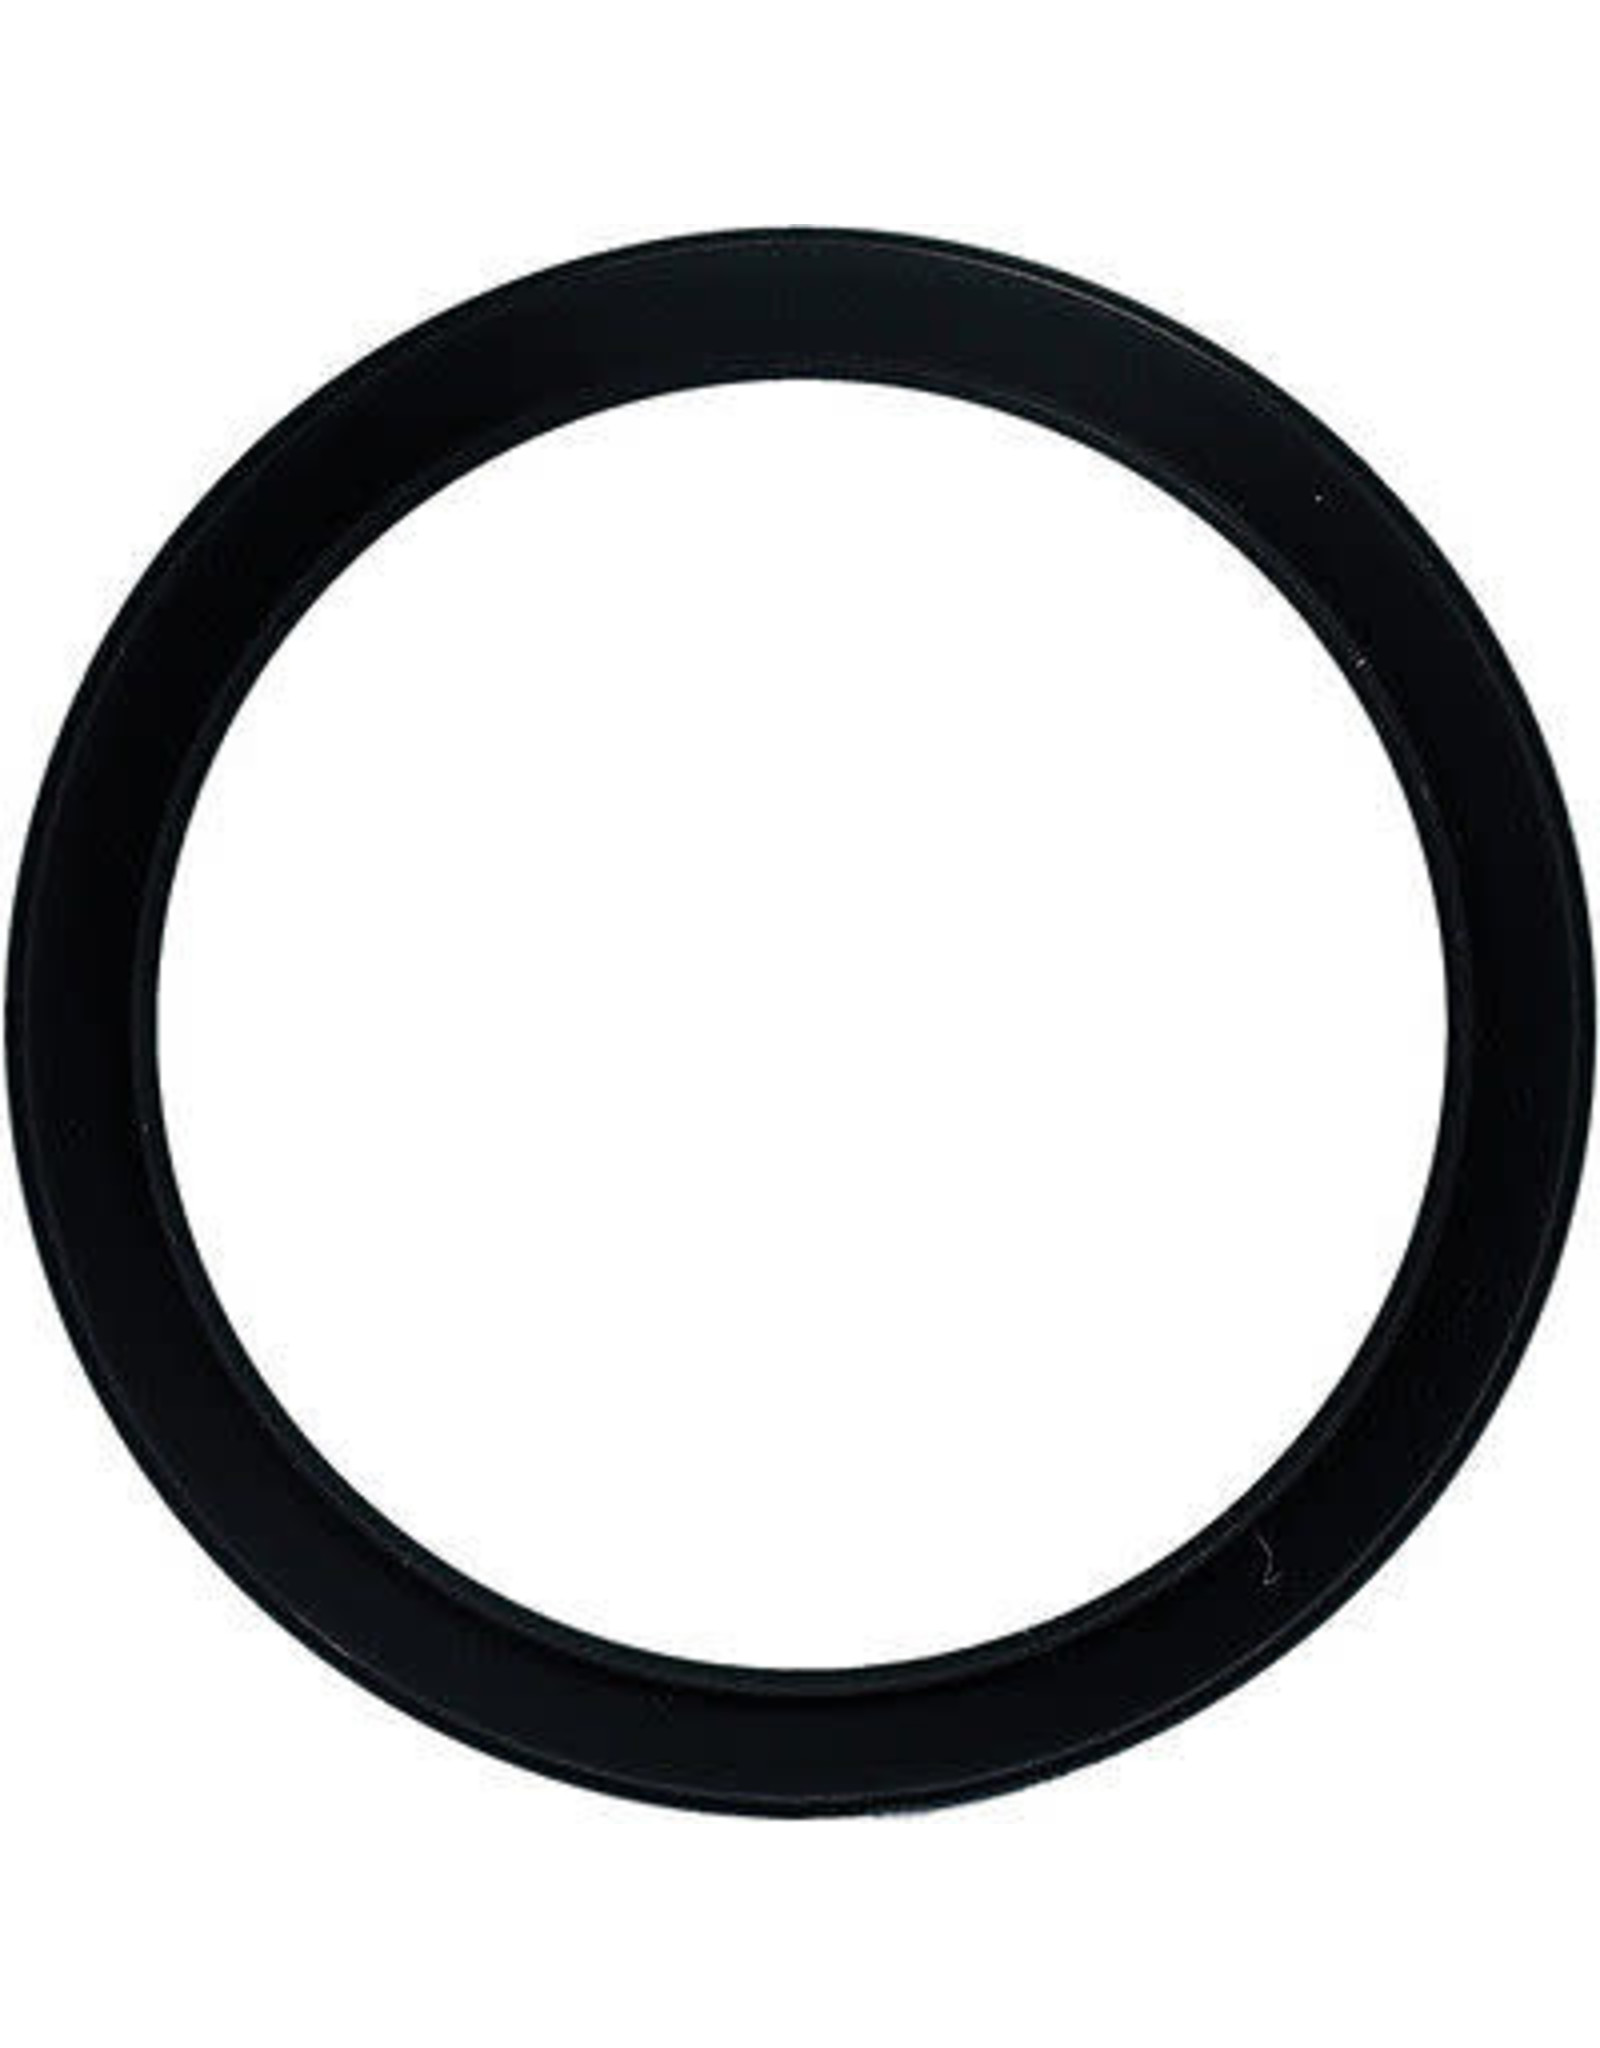 LEE Filters 60mm Adapter Ring for RF75 Filter Holder System